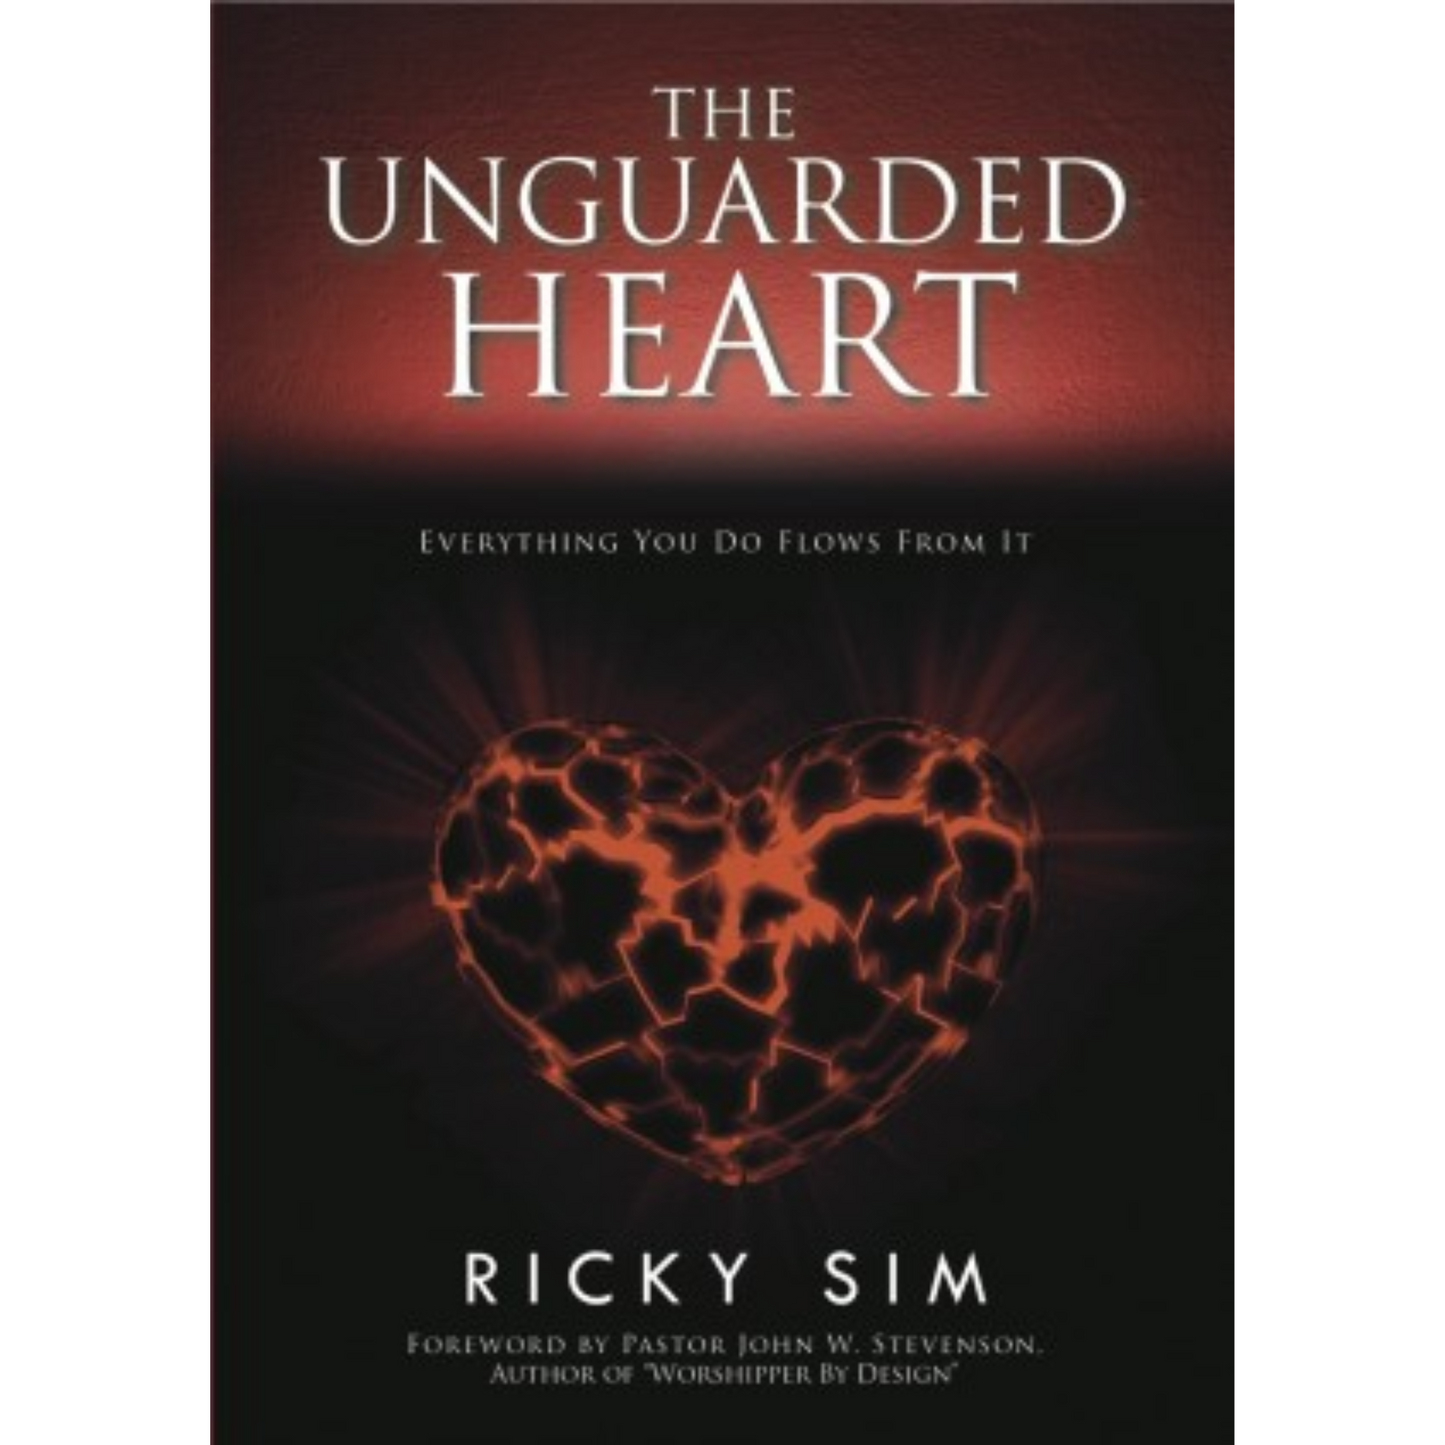 The Unguarded Heart